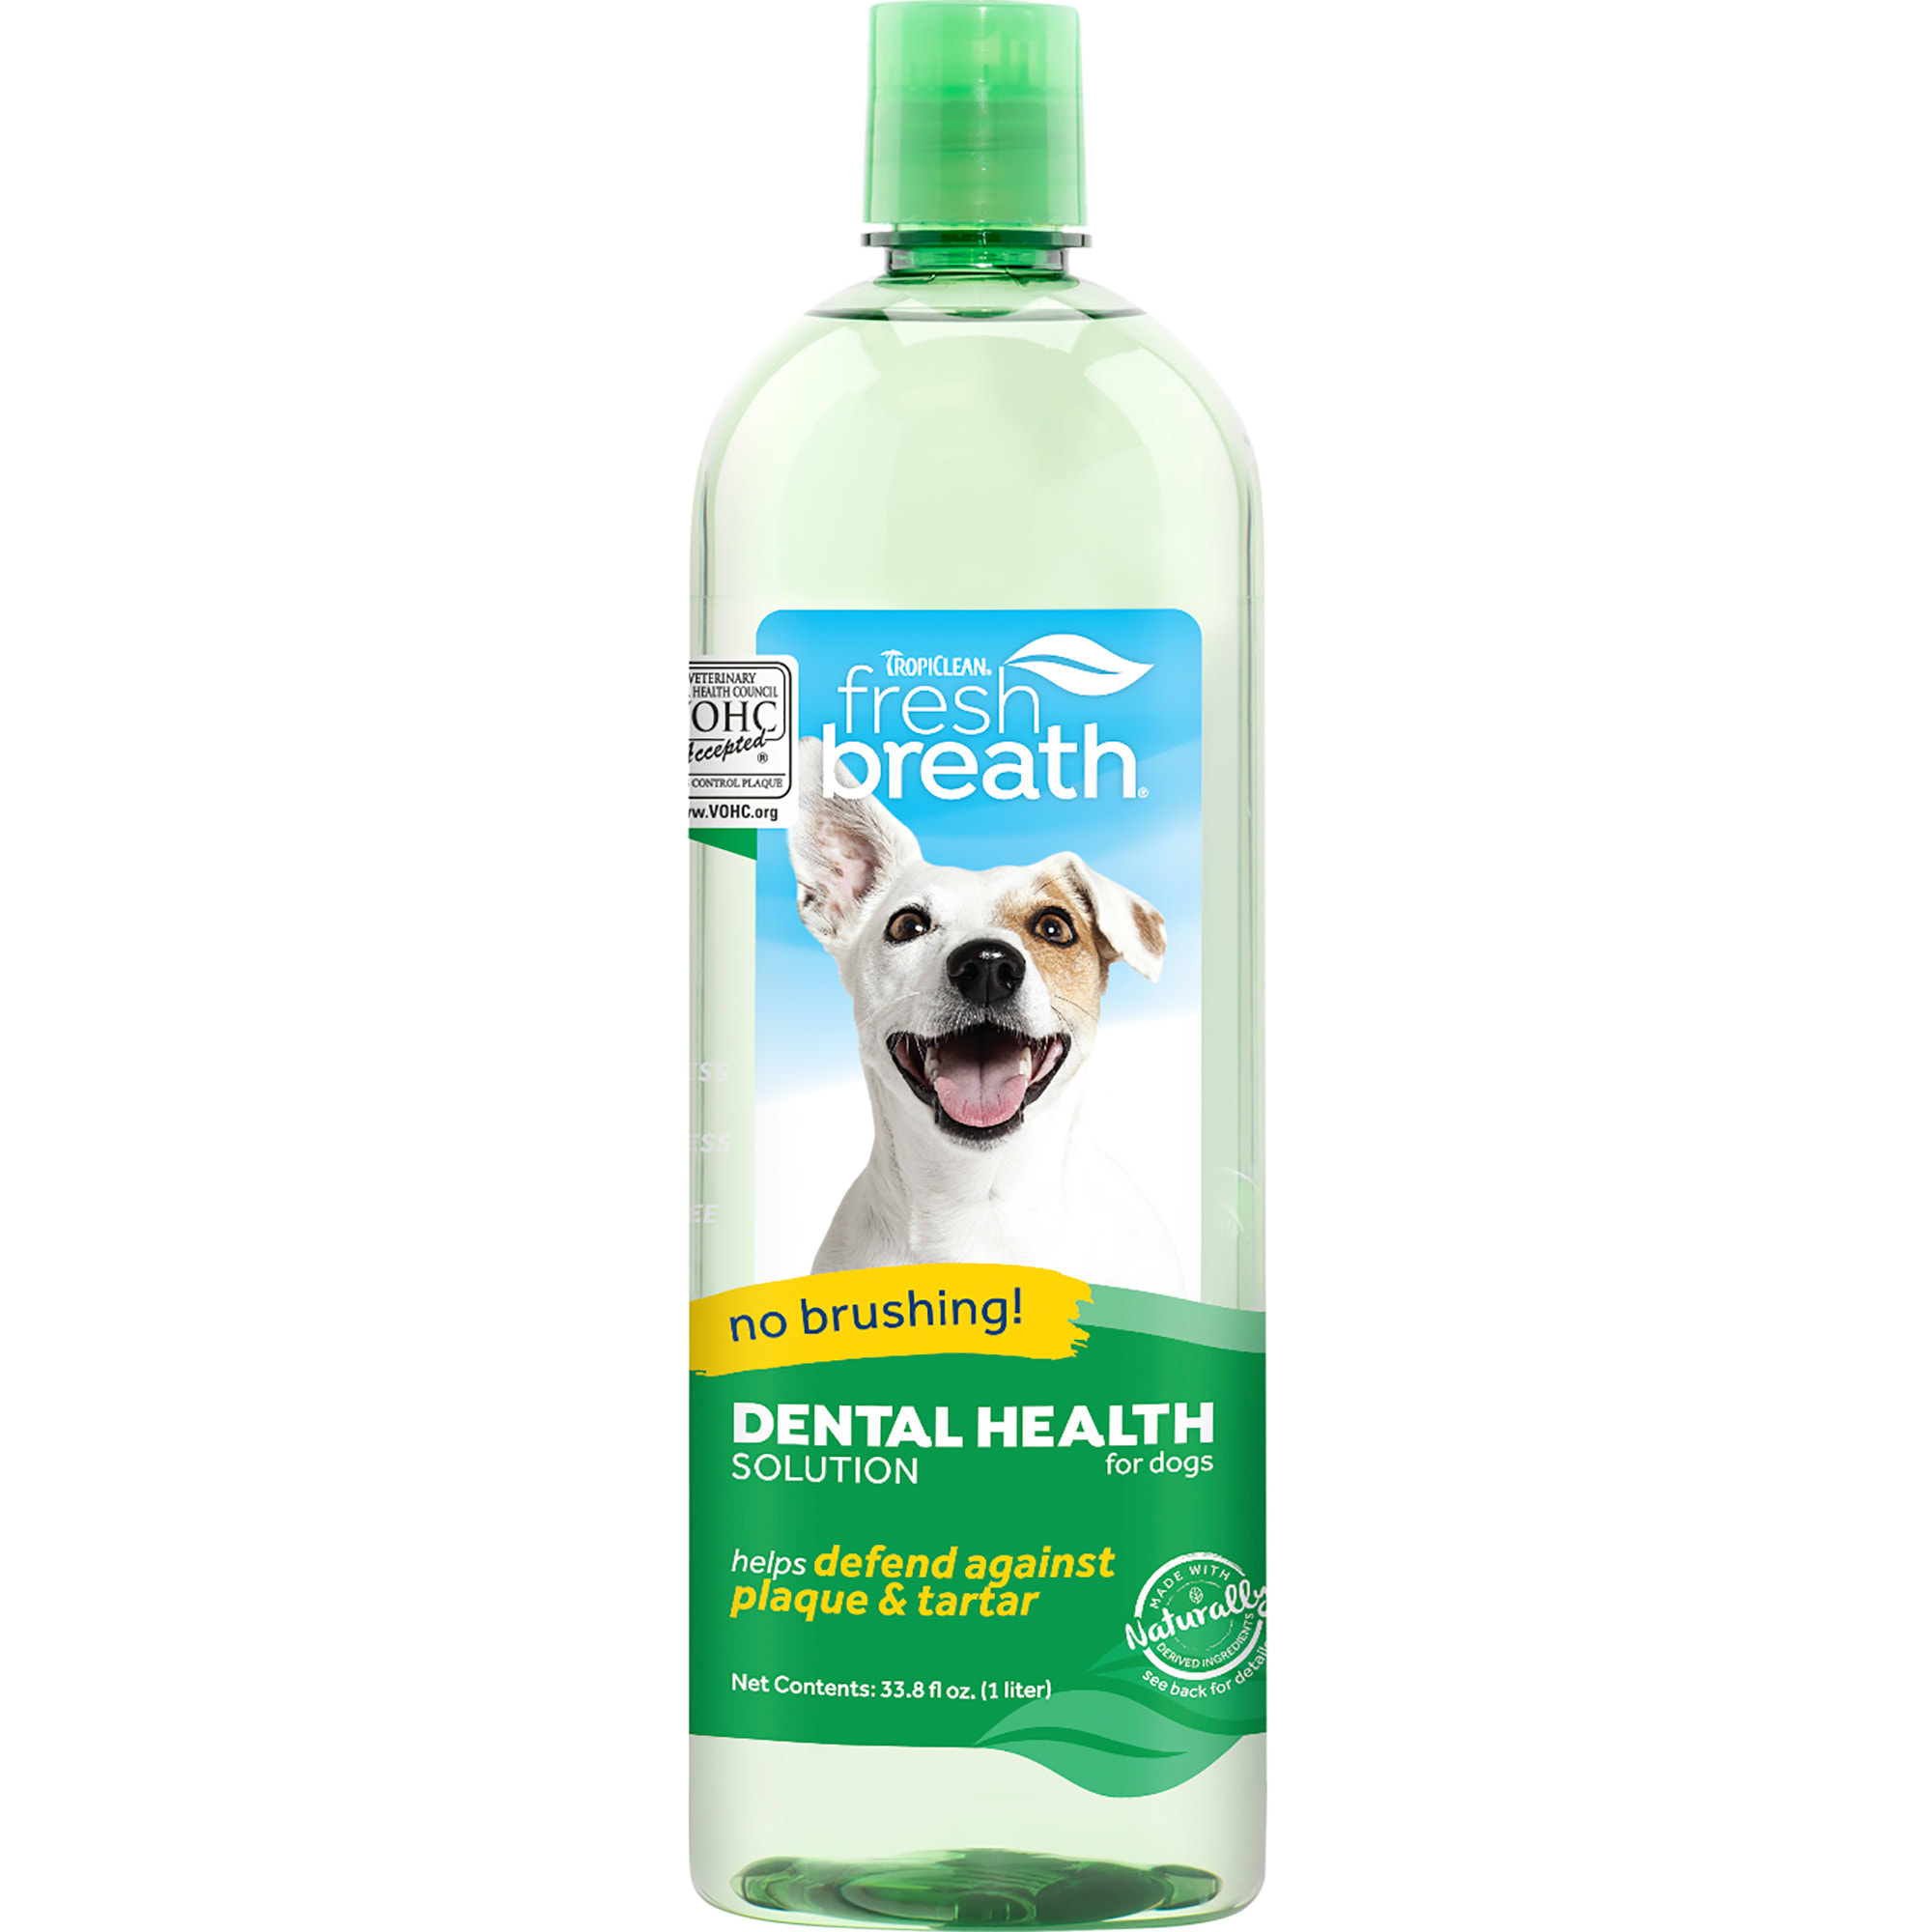 No Artificial Colors Helps Brush Away Plaque for Fresh Breath Grains Gluten dailydose Dental Doubles Dog Chews Clean Teeth Vet-Formulated Daily Dose Dental Treat Preservatives Healthy Gums 